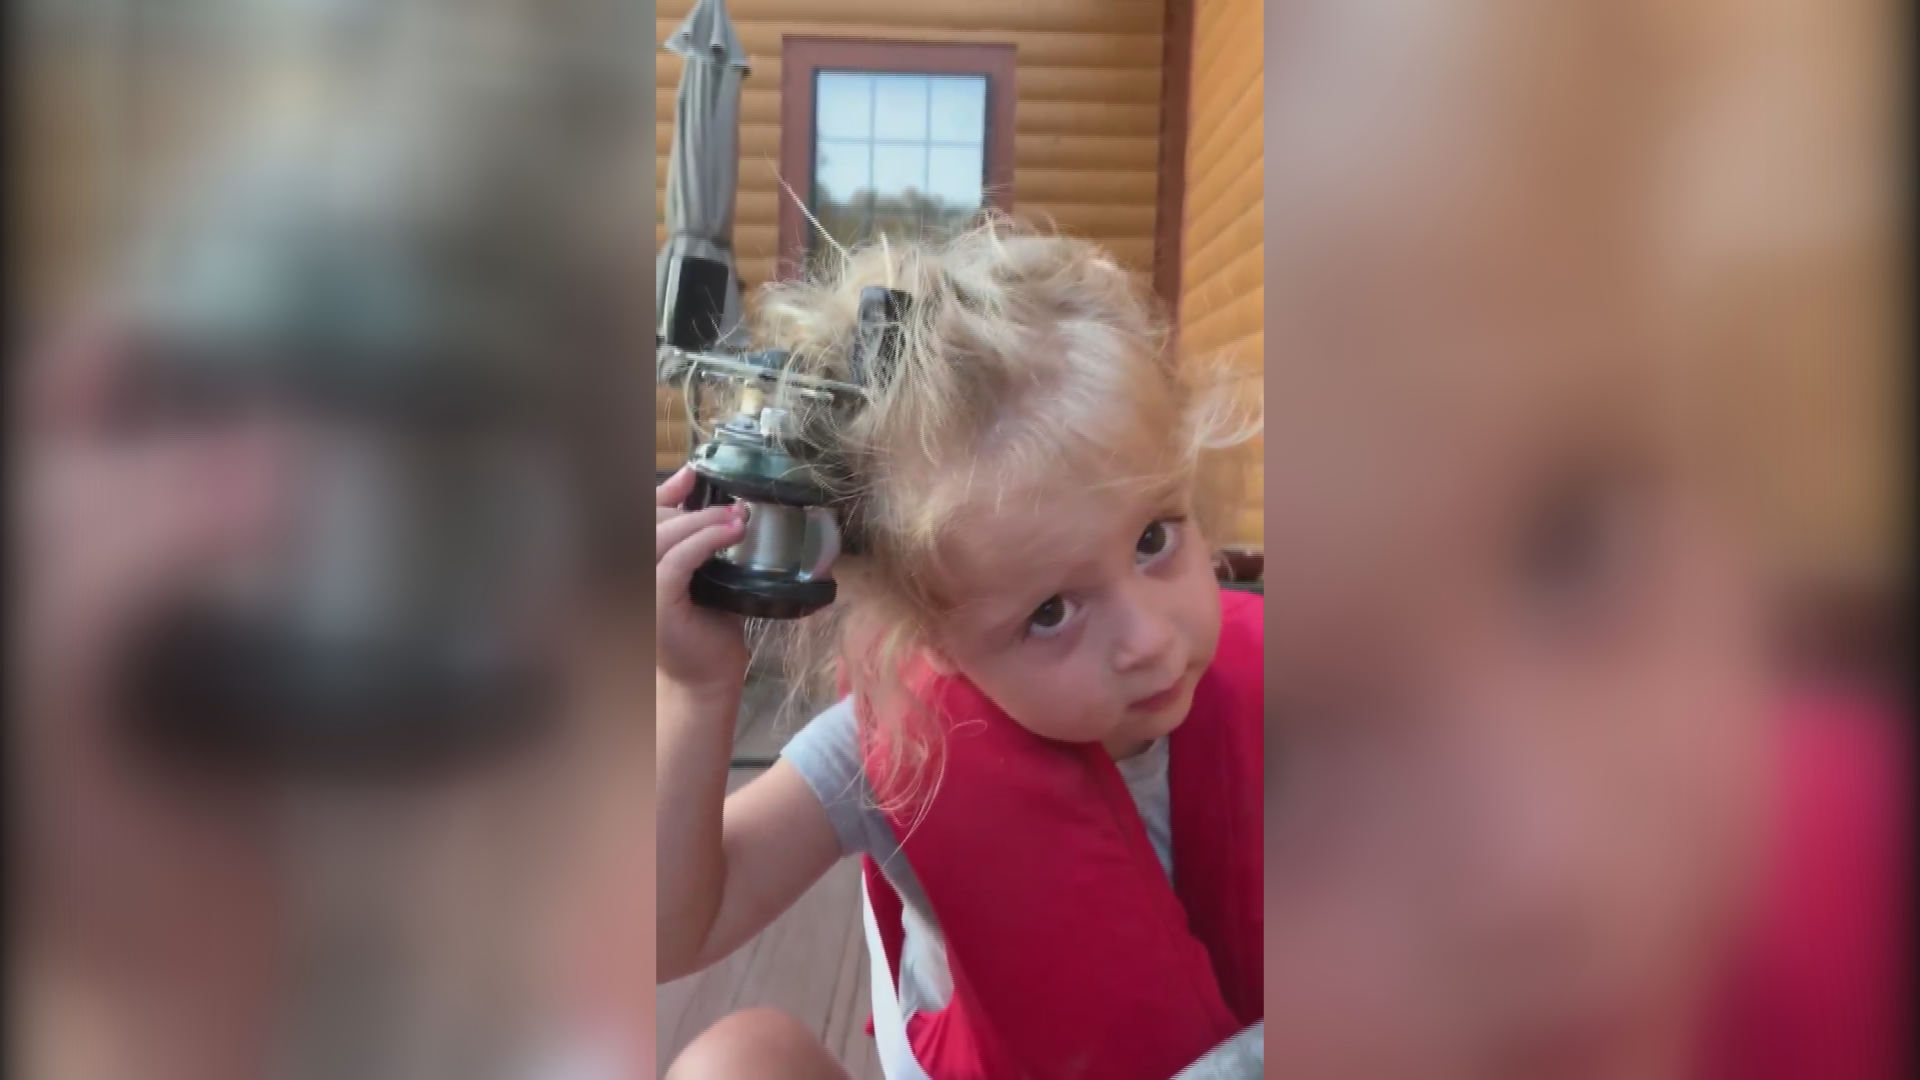 During a fishing trip with her dad, a girl got a fishing reel caught in her hair